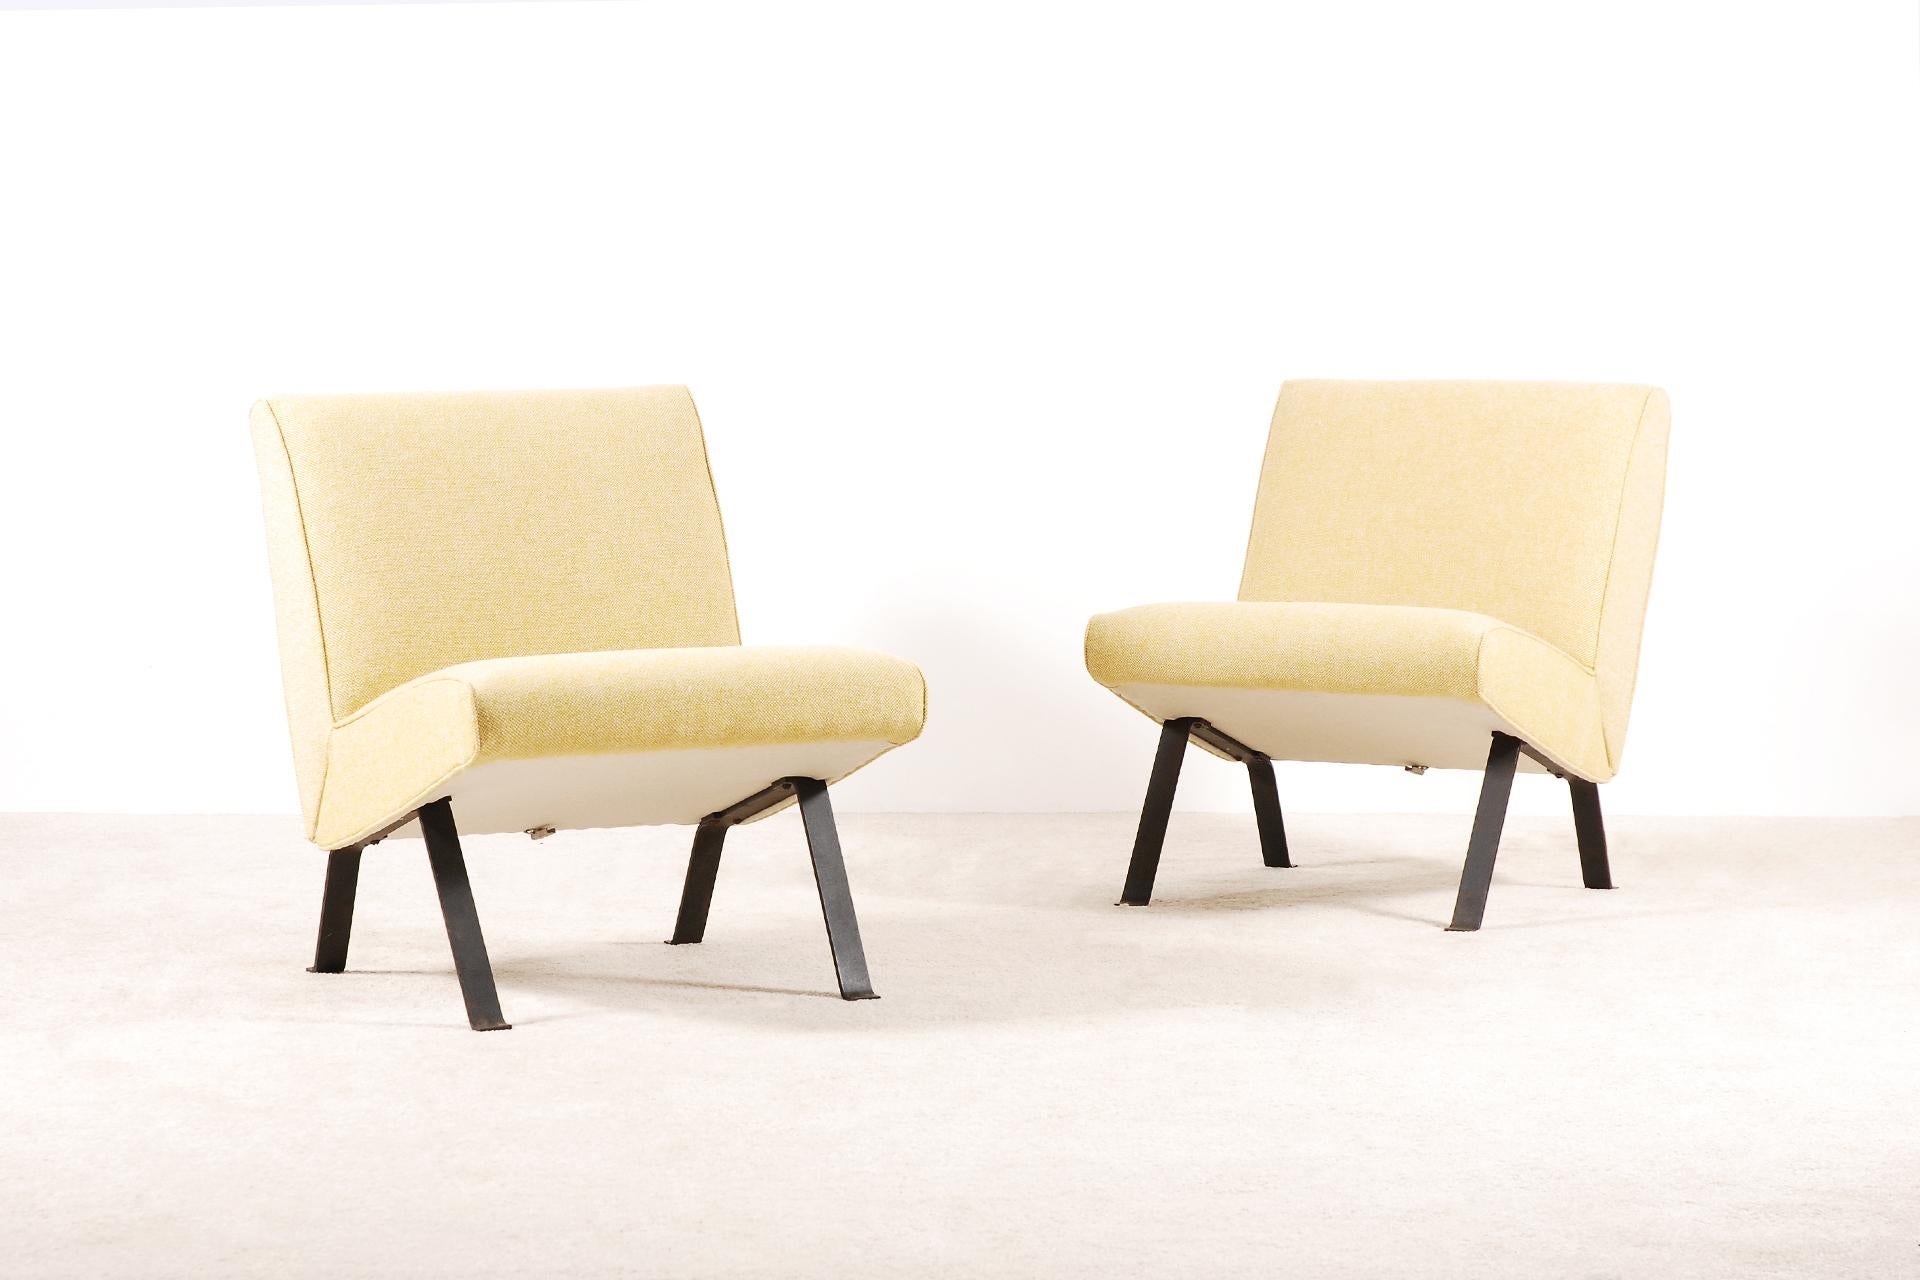 This rare pair of lounge chairs was designed by Joseph-André Motte for the exhibition 